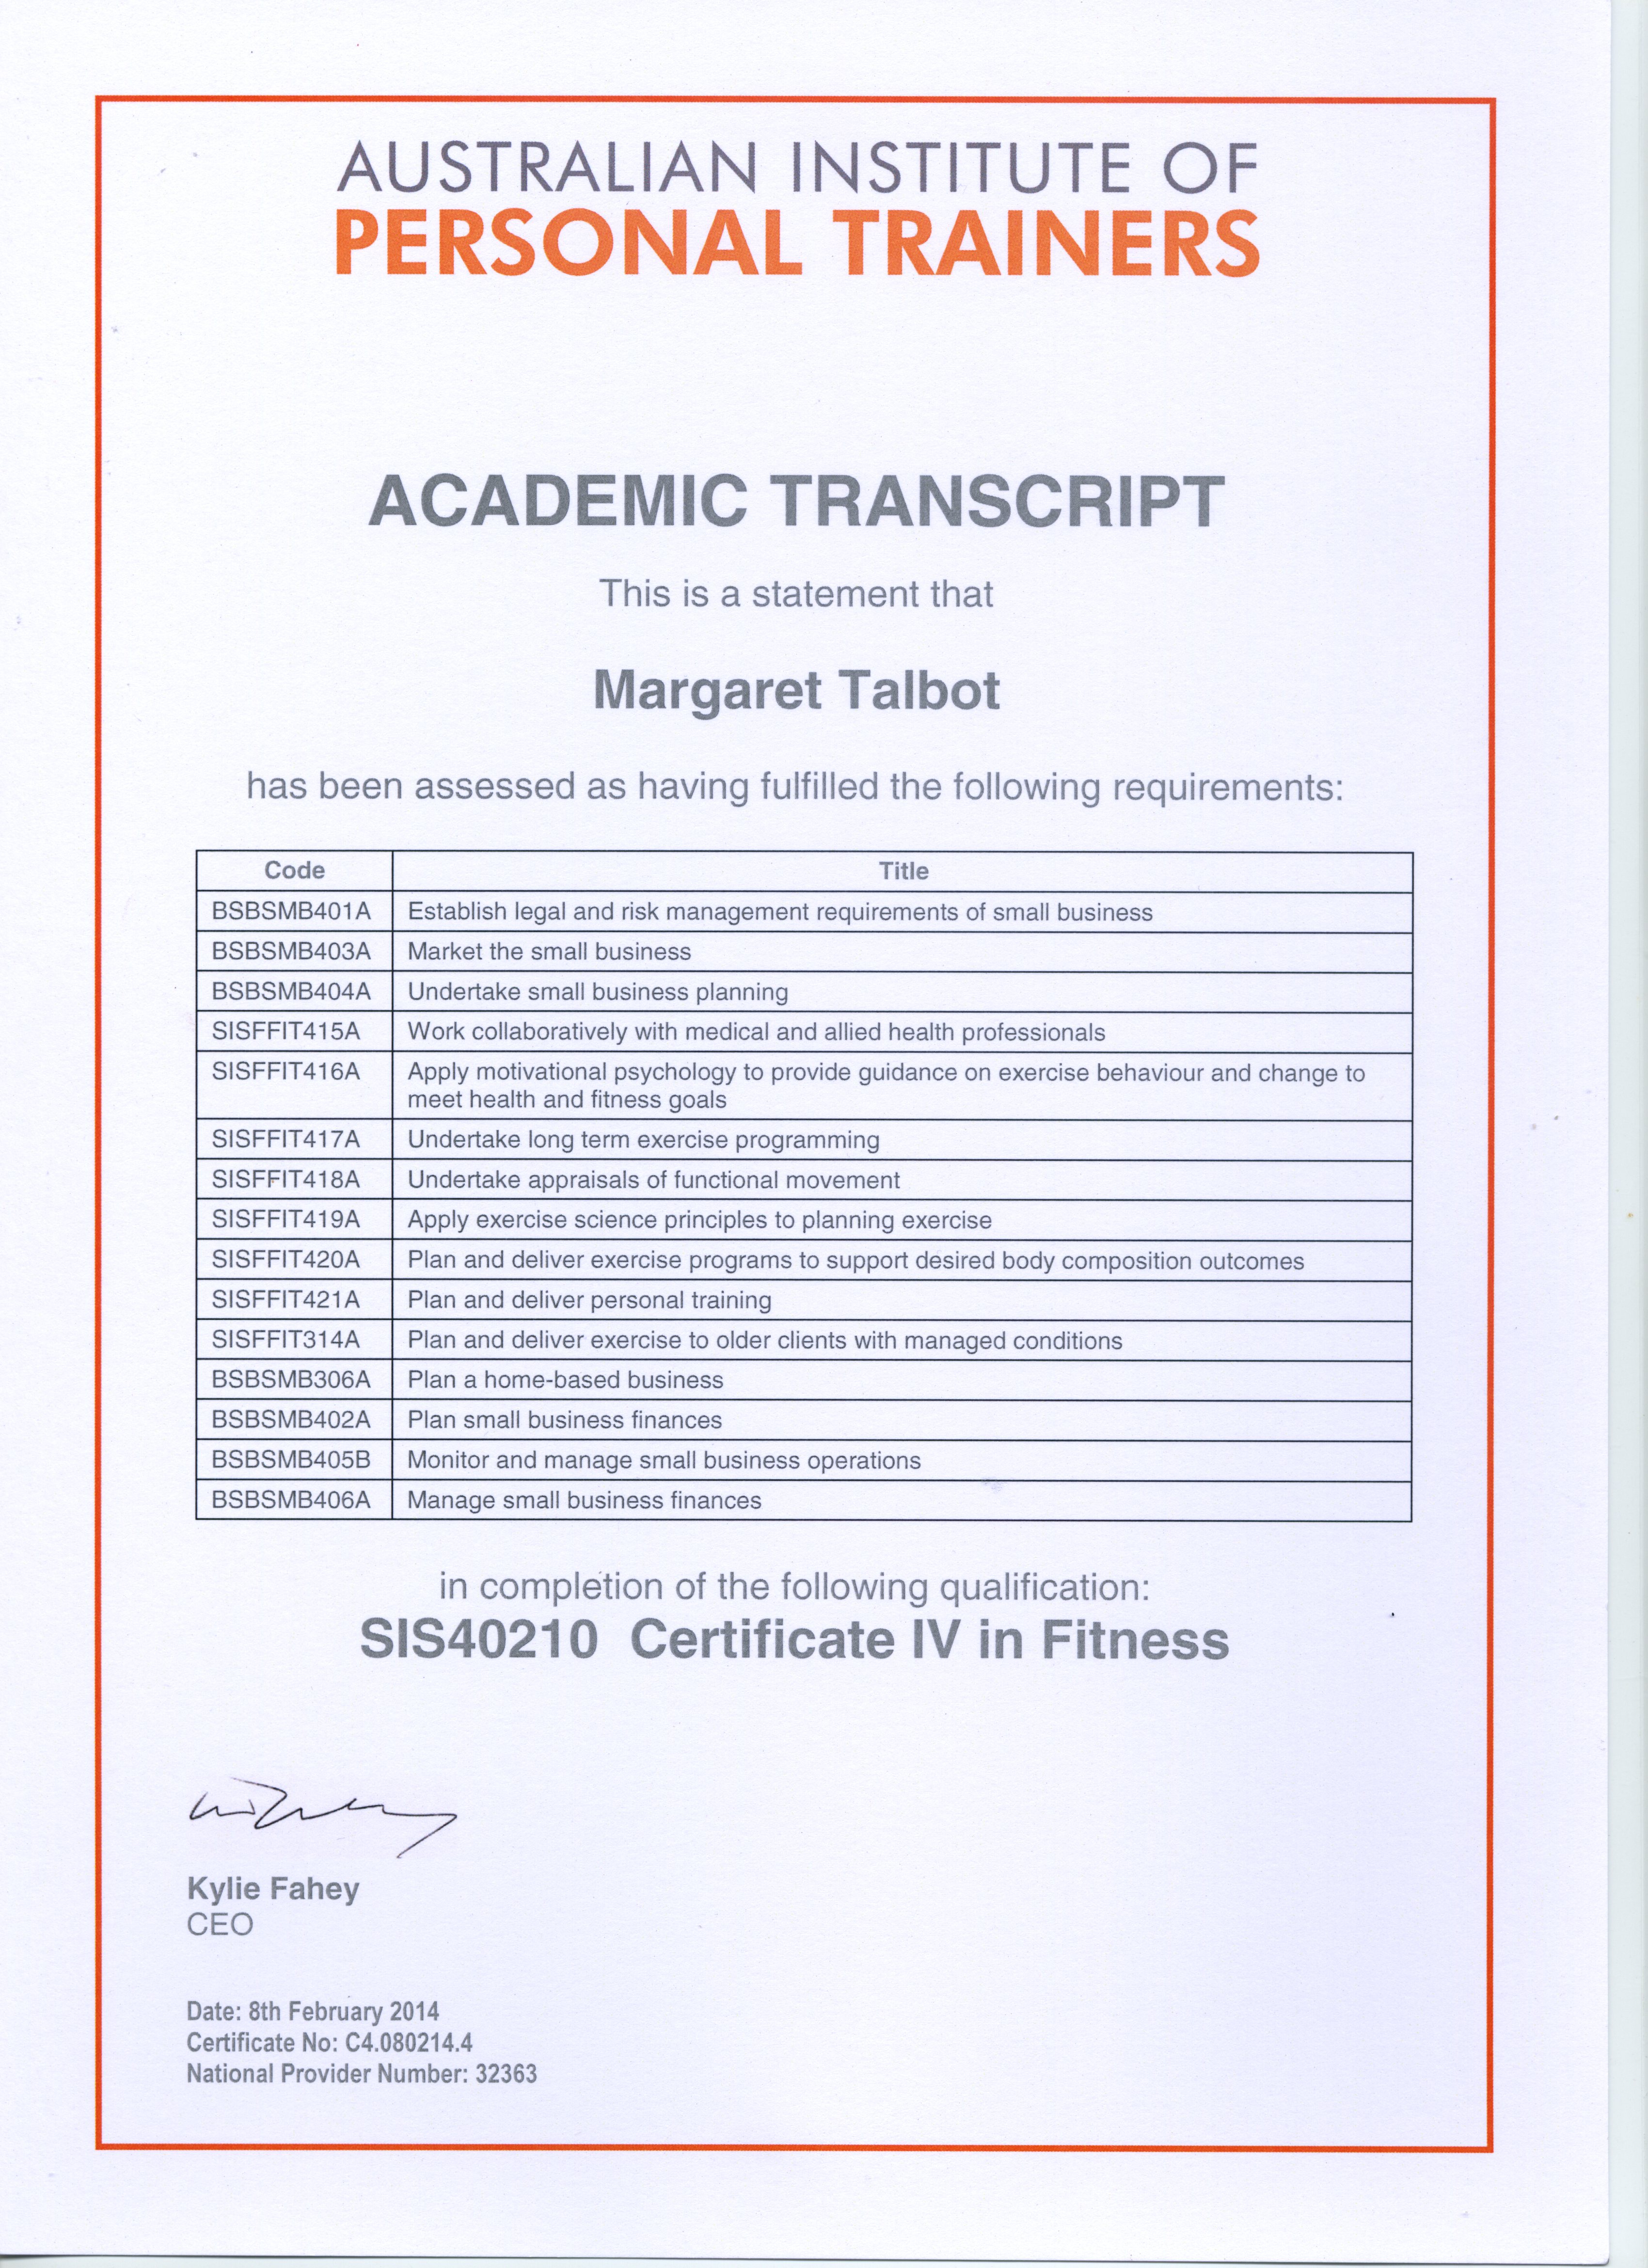 Certificate IV in Fitness SIS40210 AIPT Transcript P1 and 2